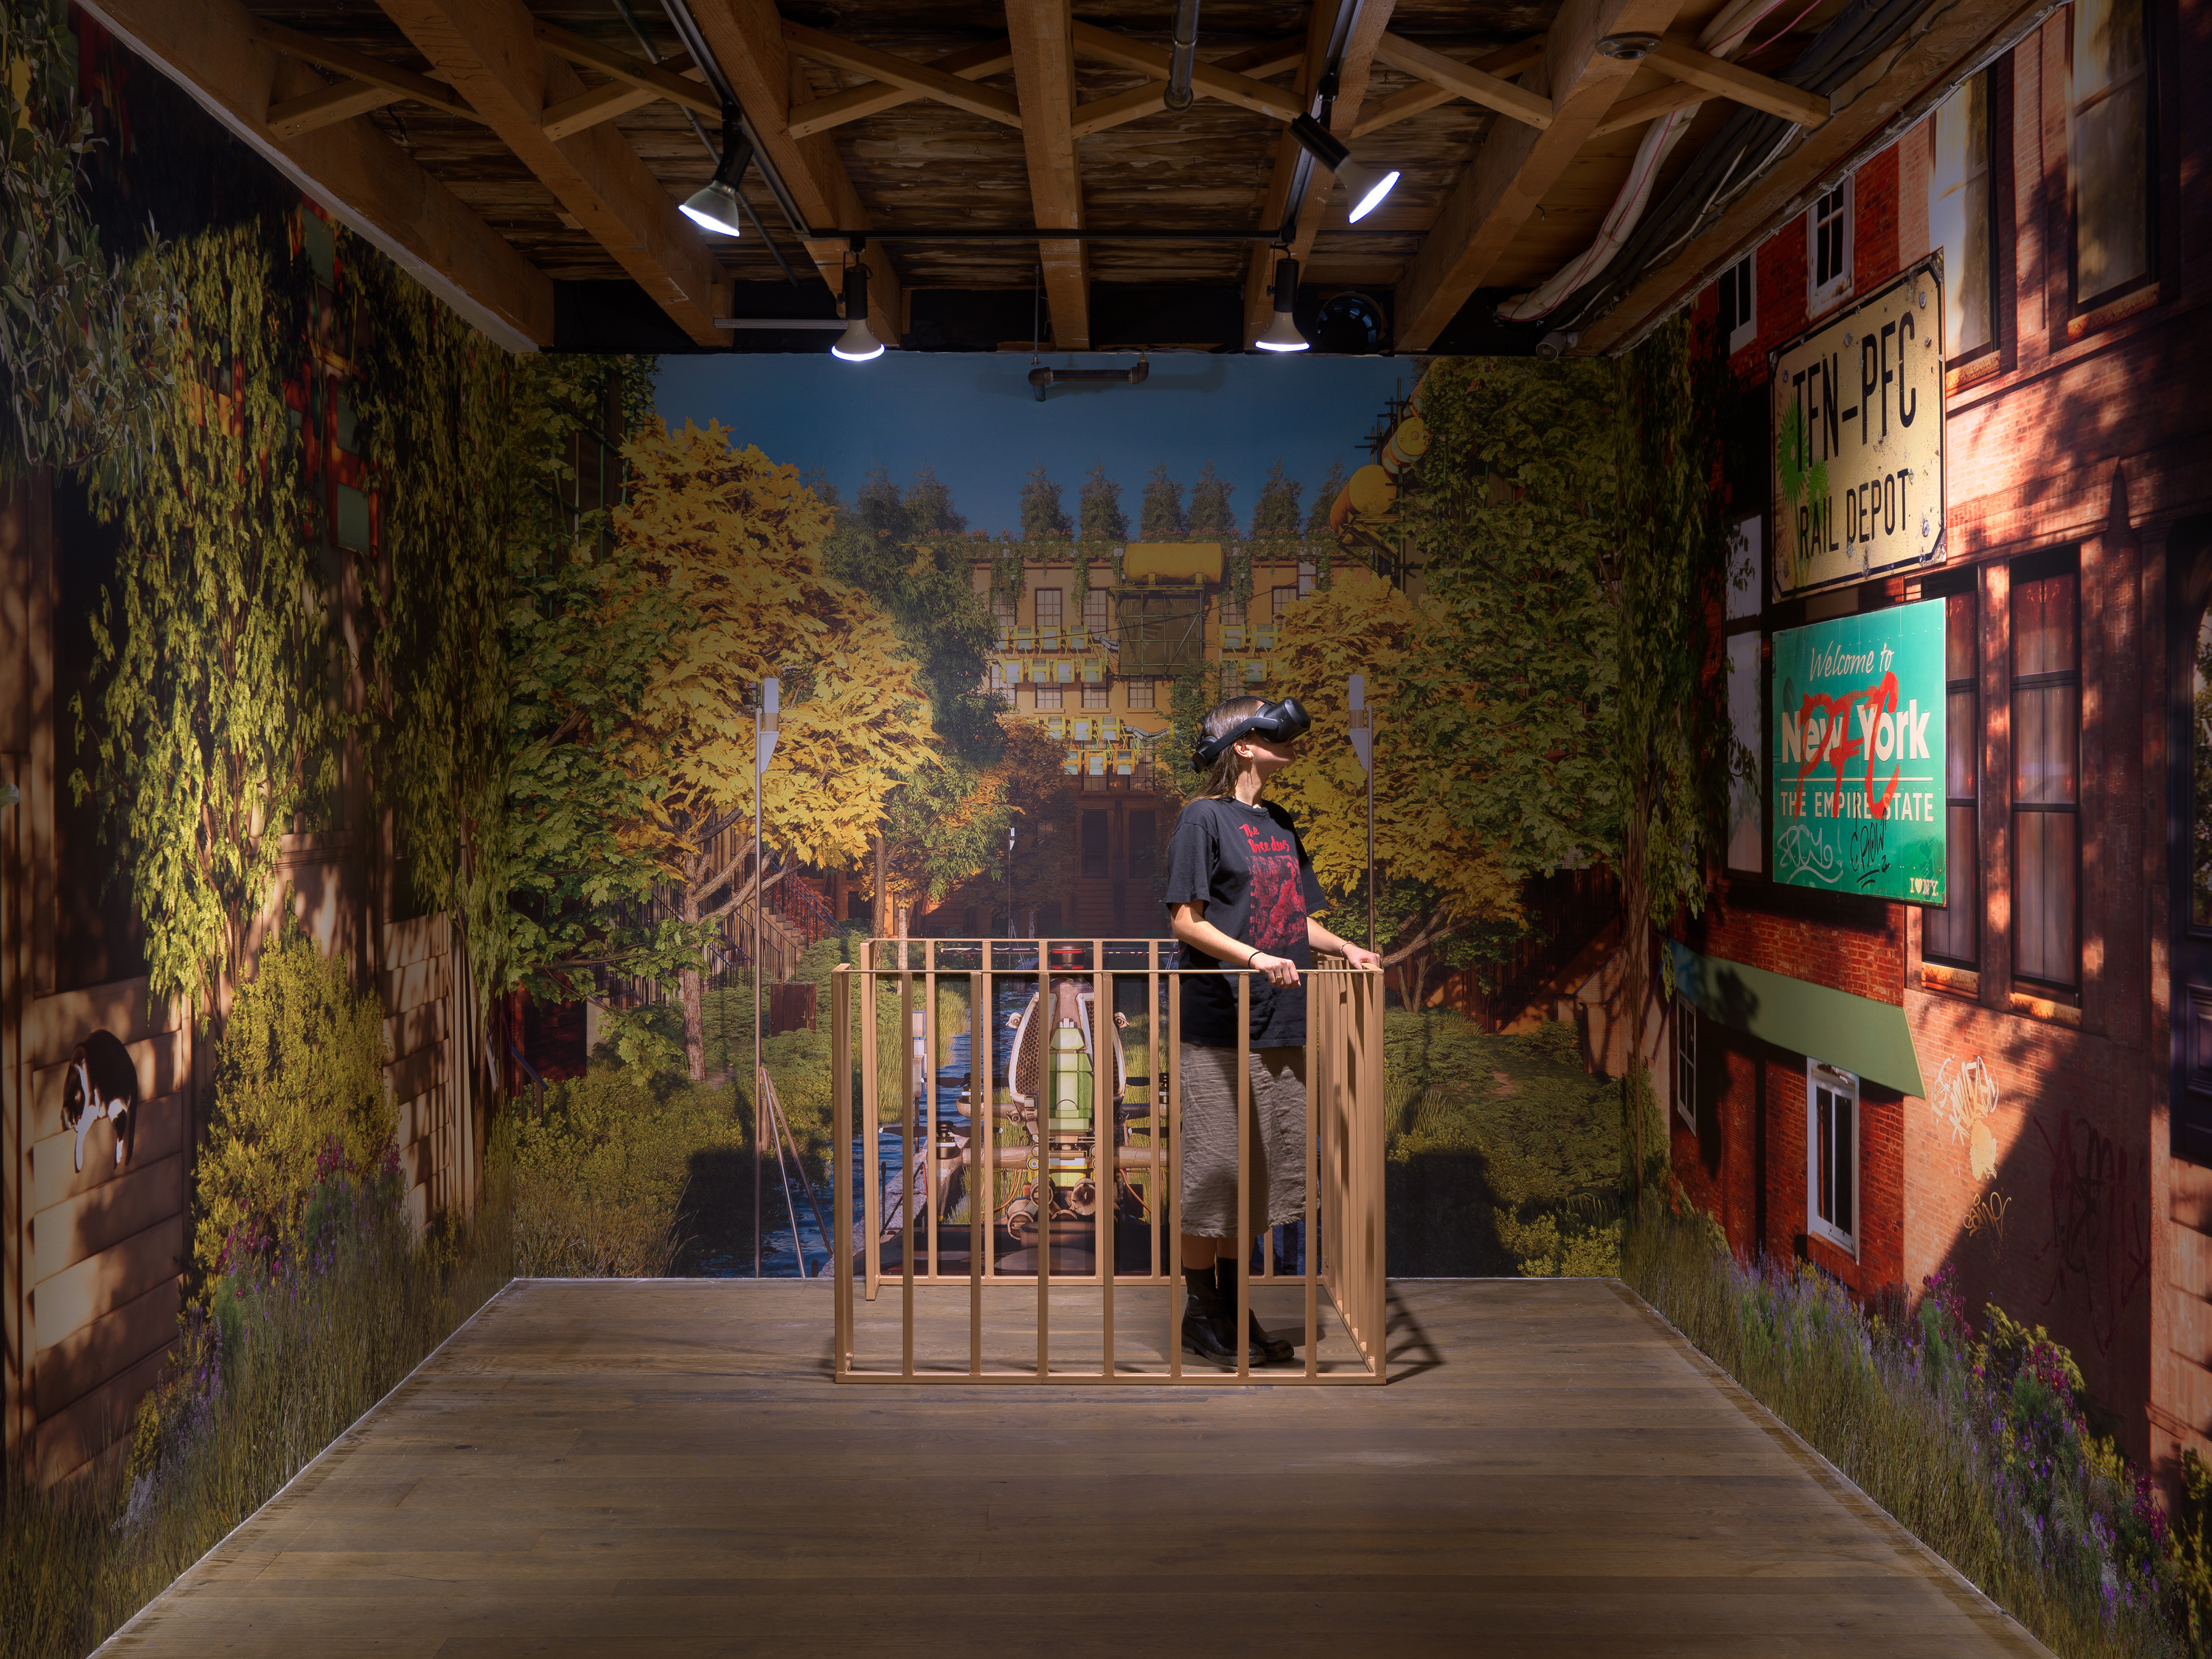 A room with painted walls with trees on them. A person stands in a mini porch with a VR headset on.